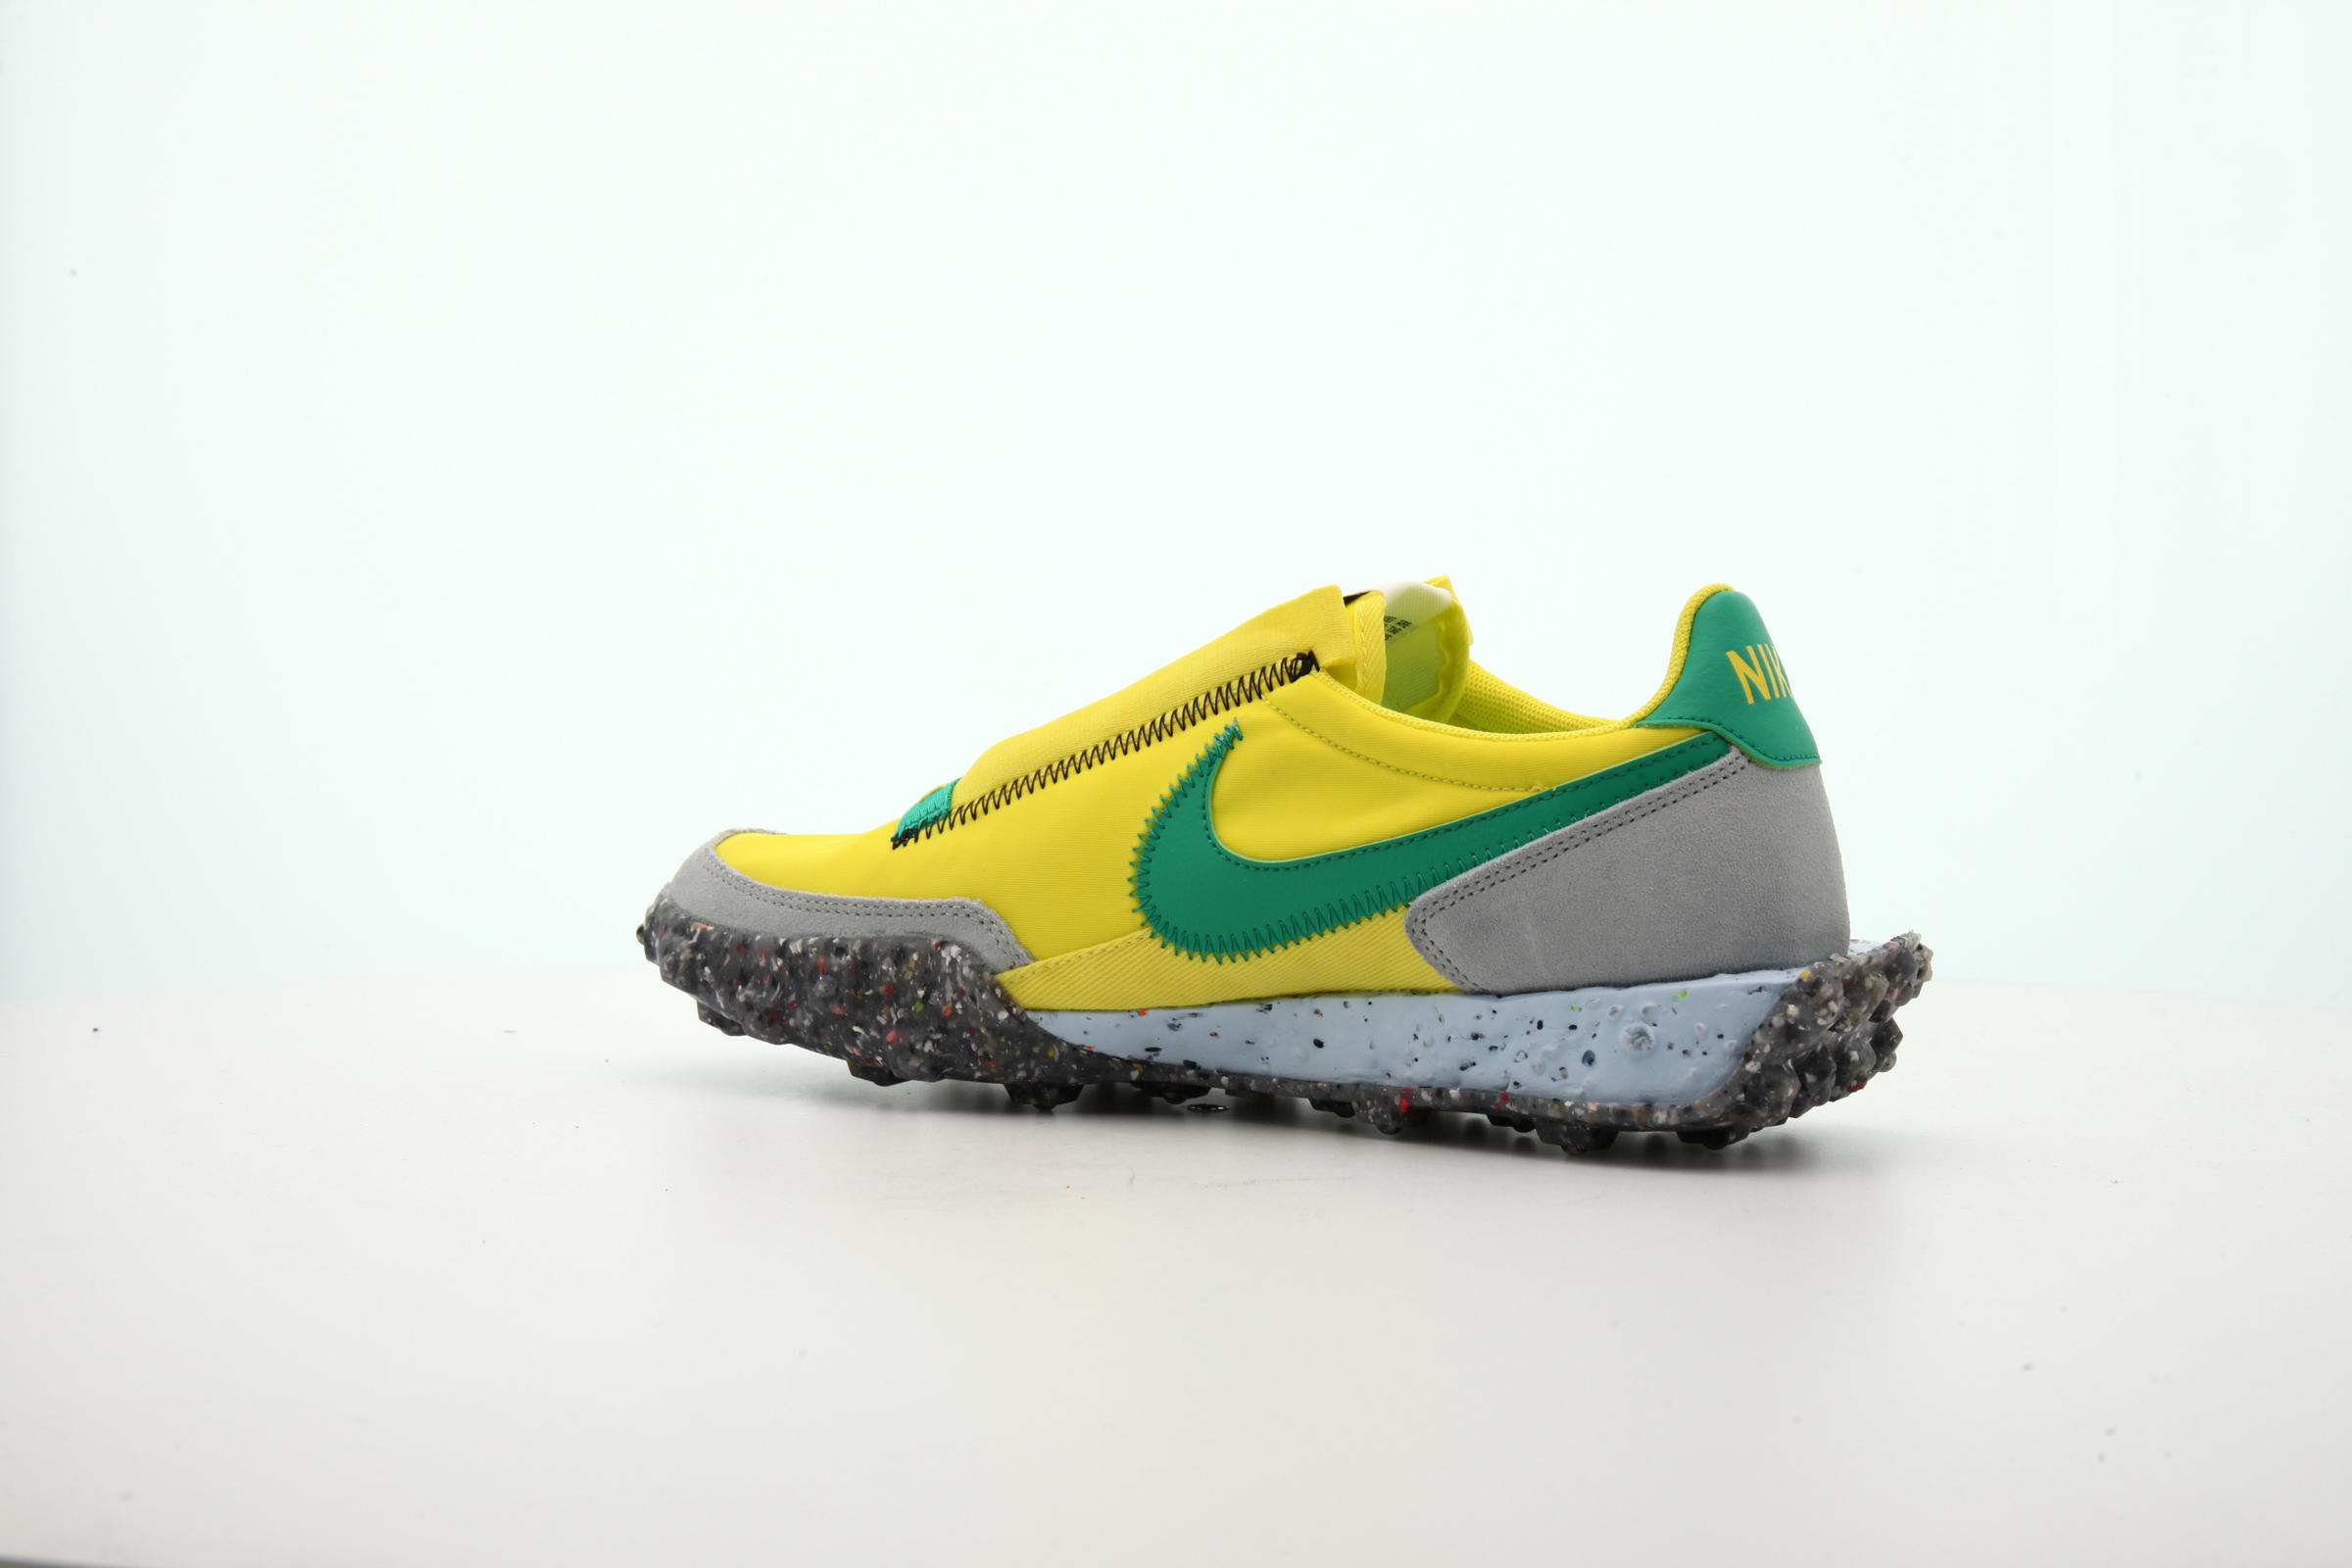 Nike WAFFLE RACER CRATER